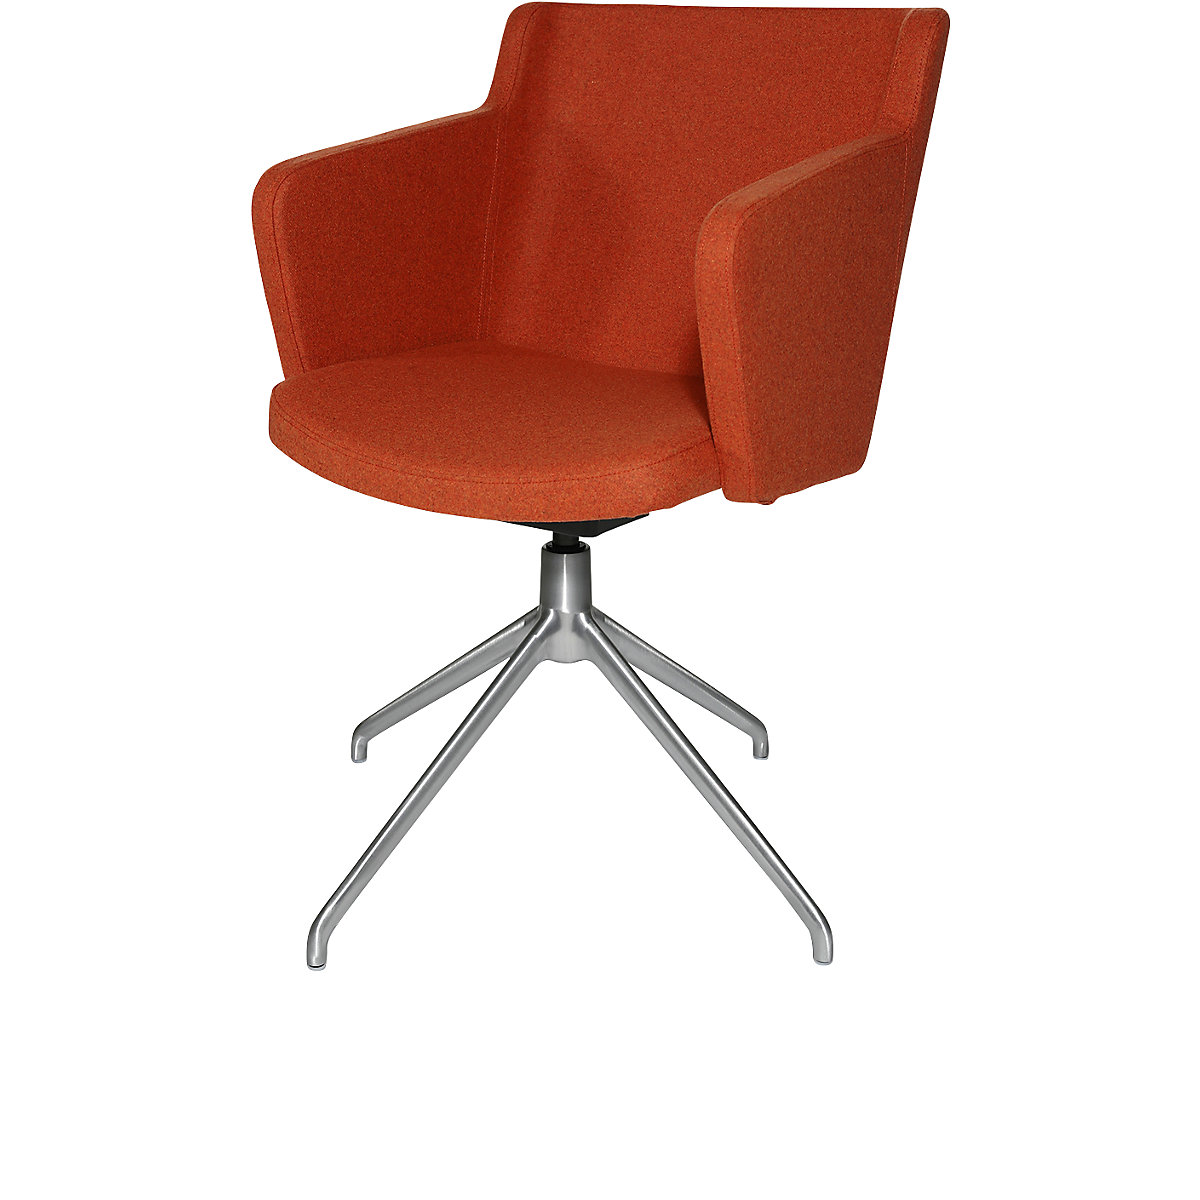 SFH visitors’ chair – Topstar, 3D seat joint and aluminium five star base, orange-13